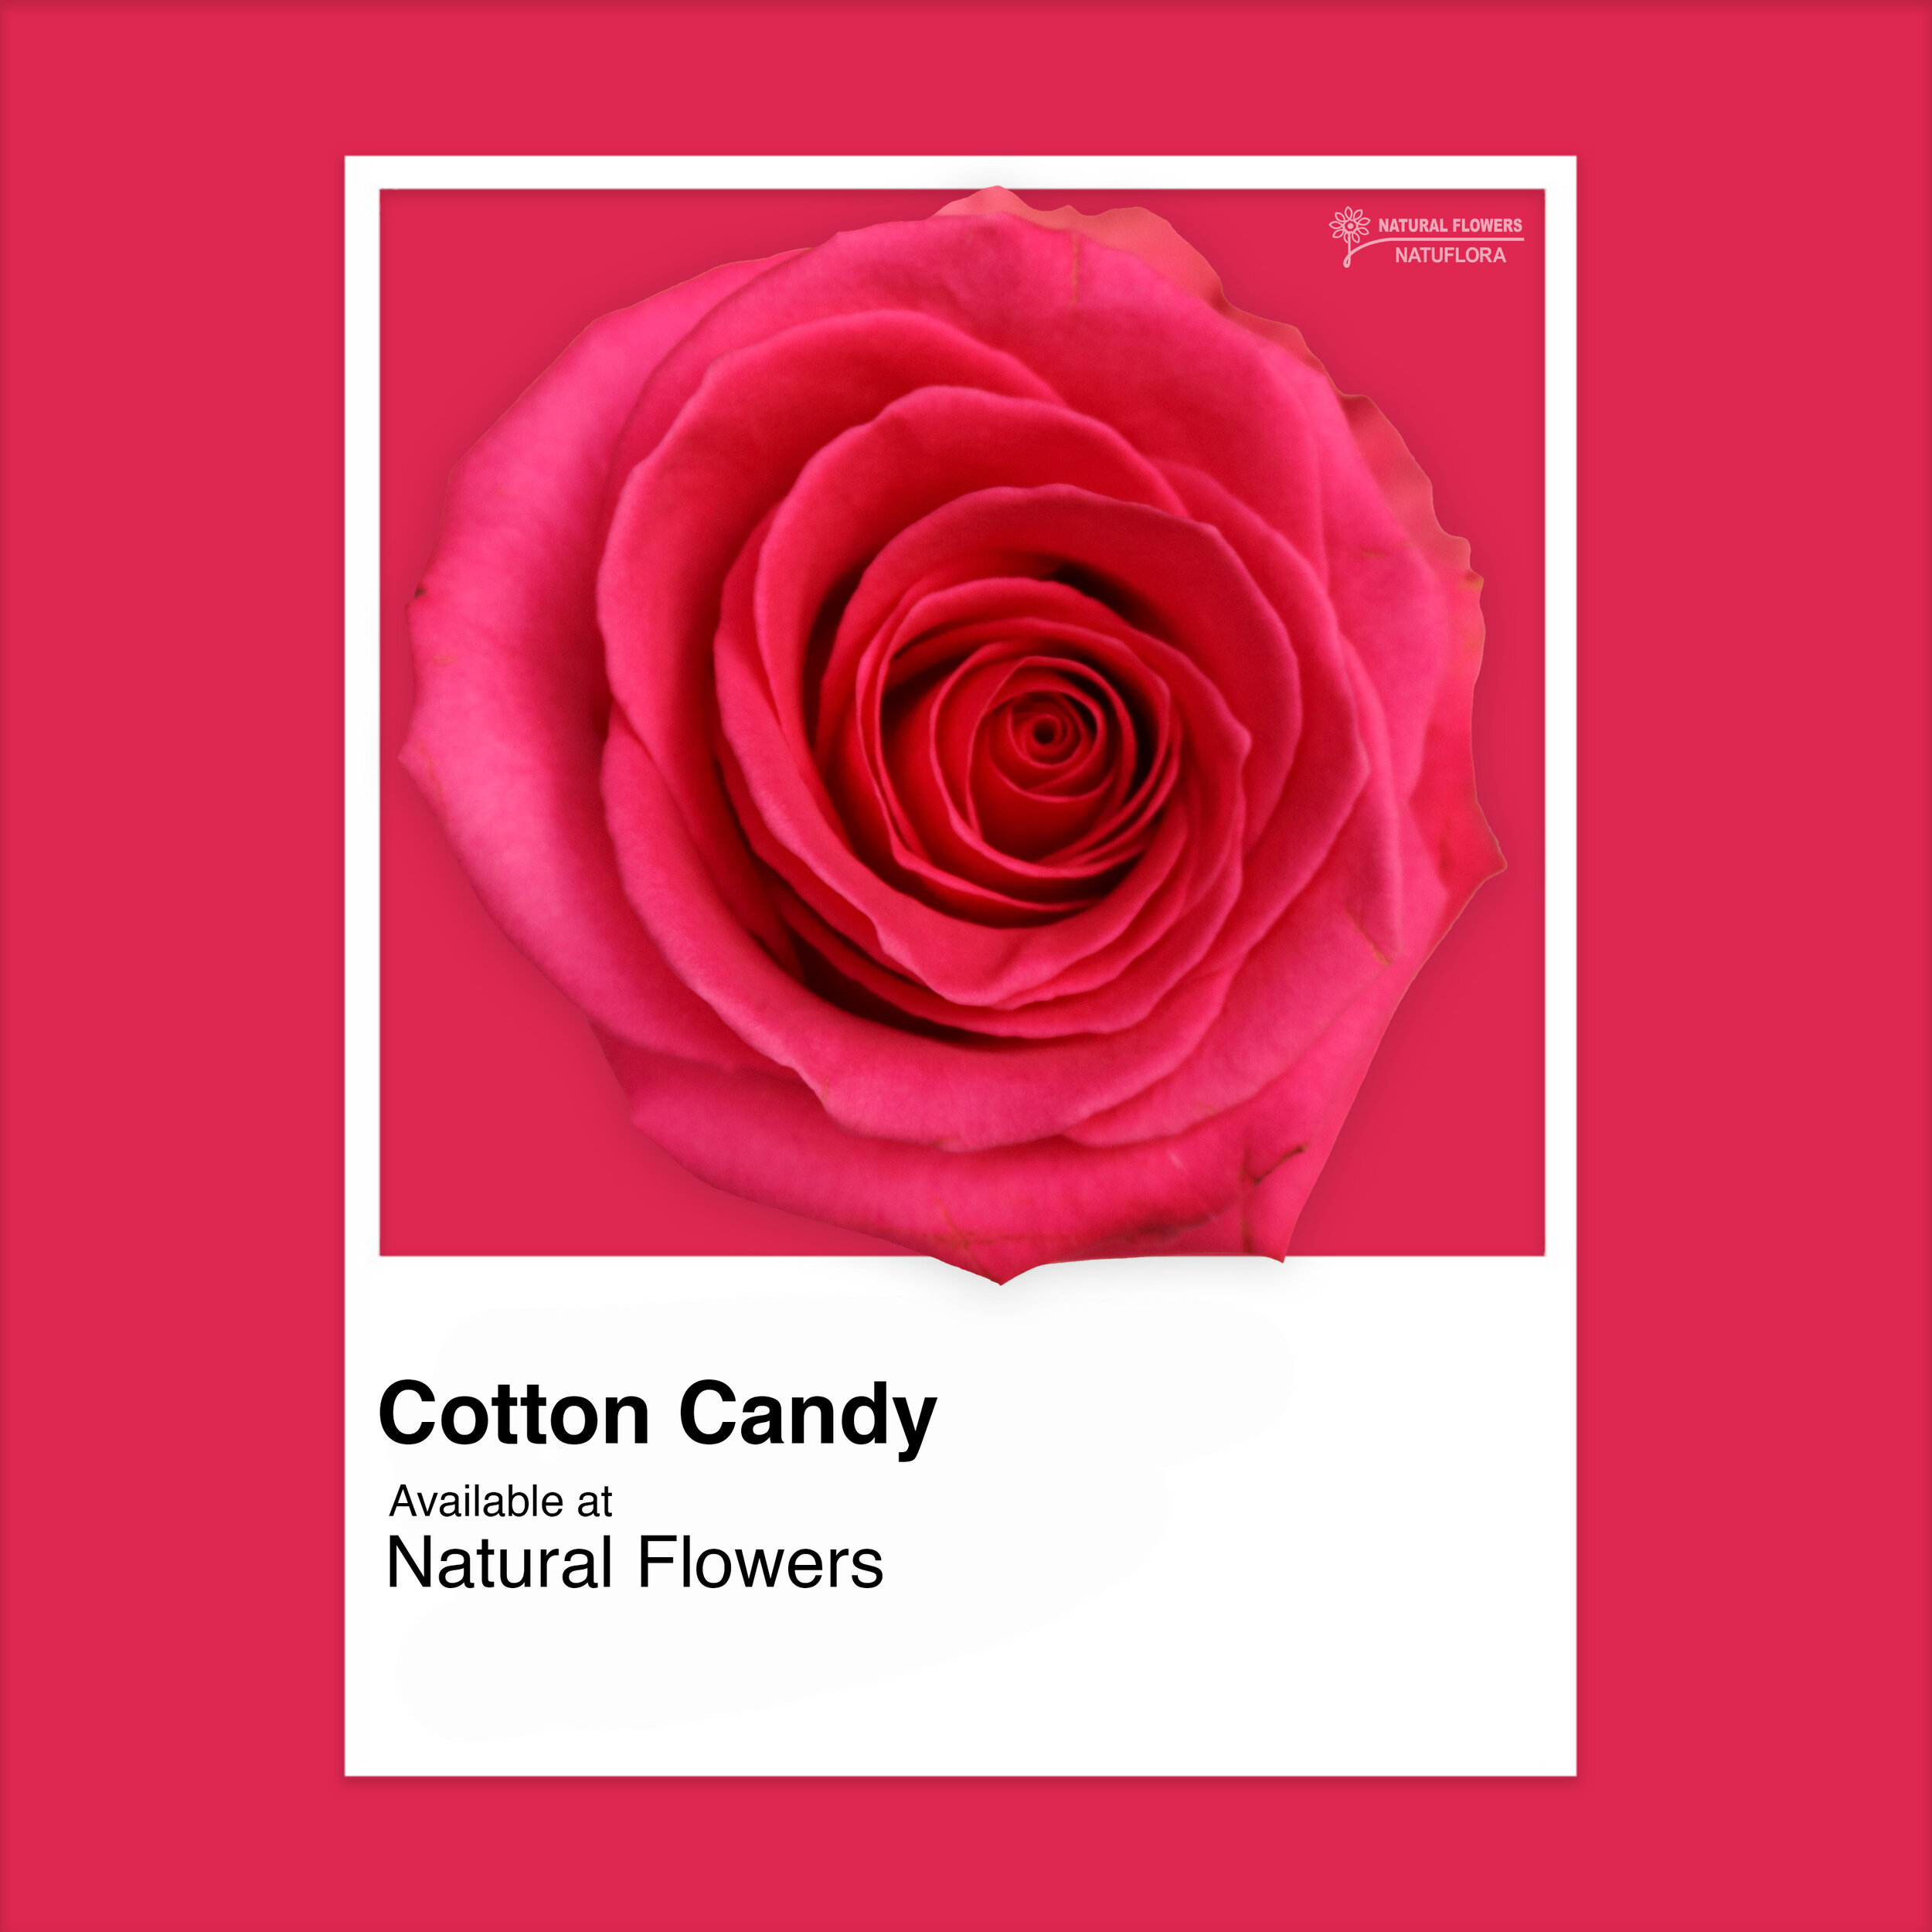 Roses - Cotton Candy.jpg